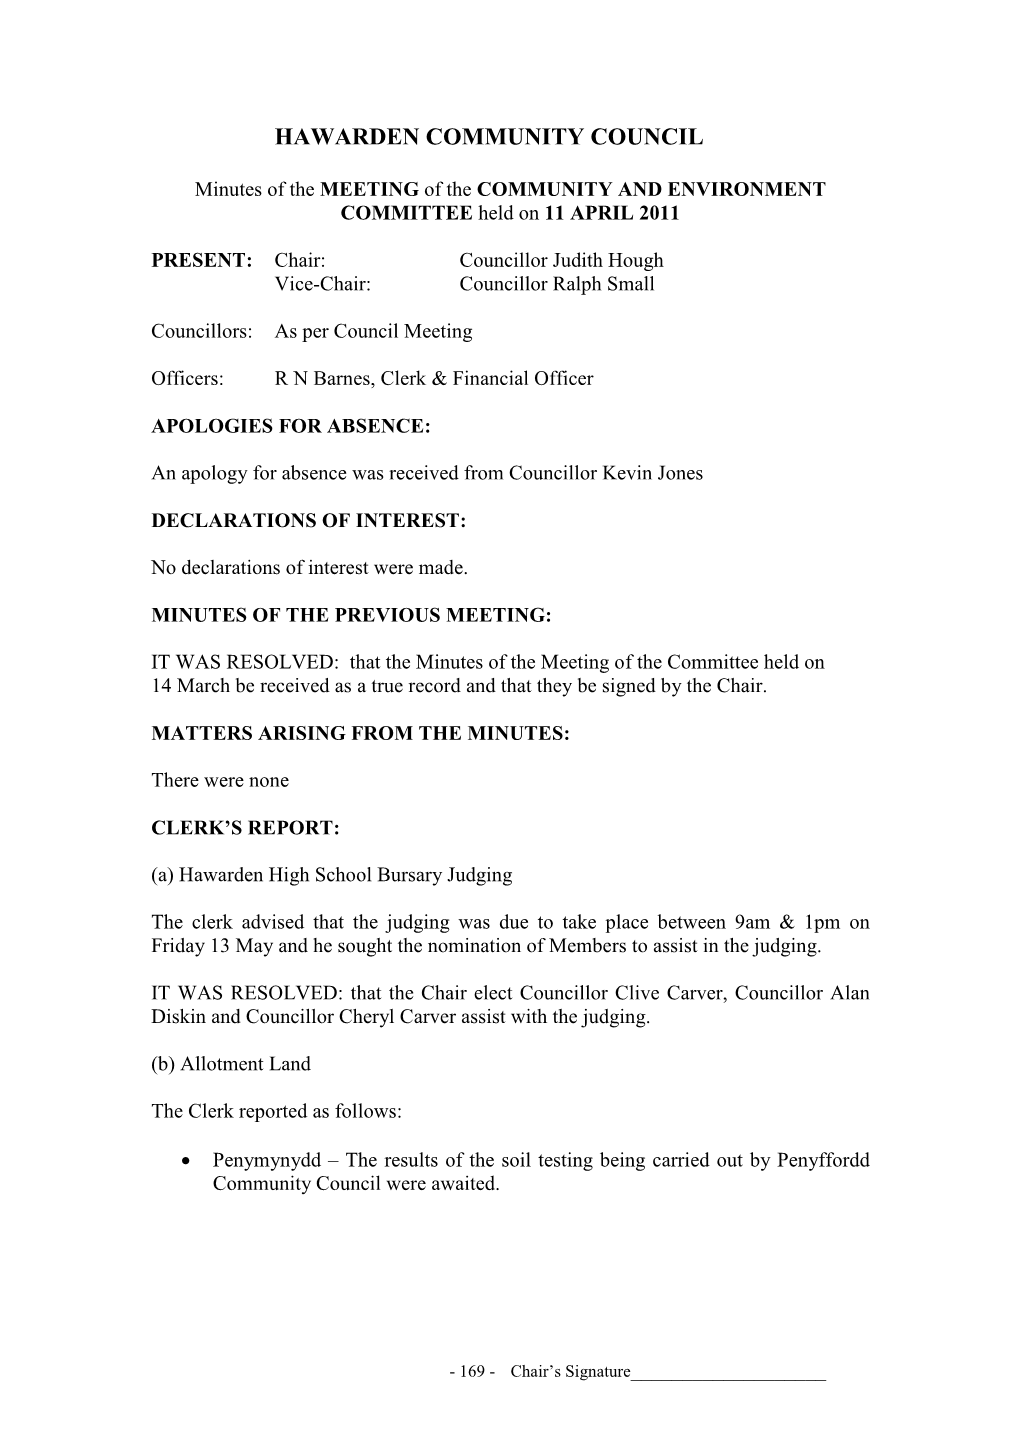 Minutes of the MEETING of the COMMUNITY and ENVIRONMENT COMMITTEE Held on 11 APRIL 2011